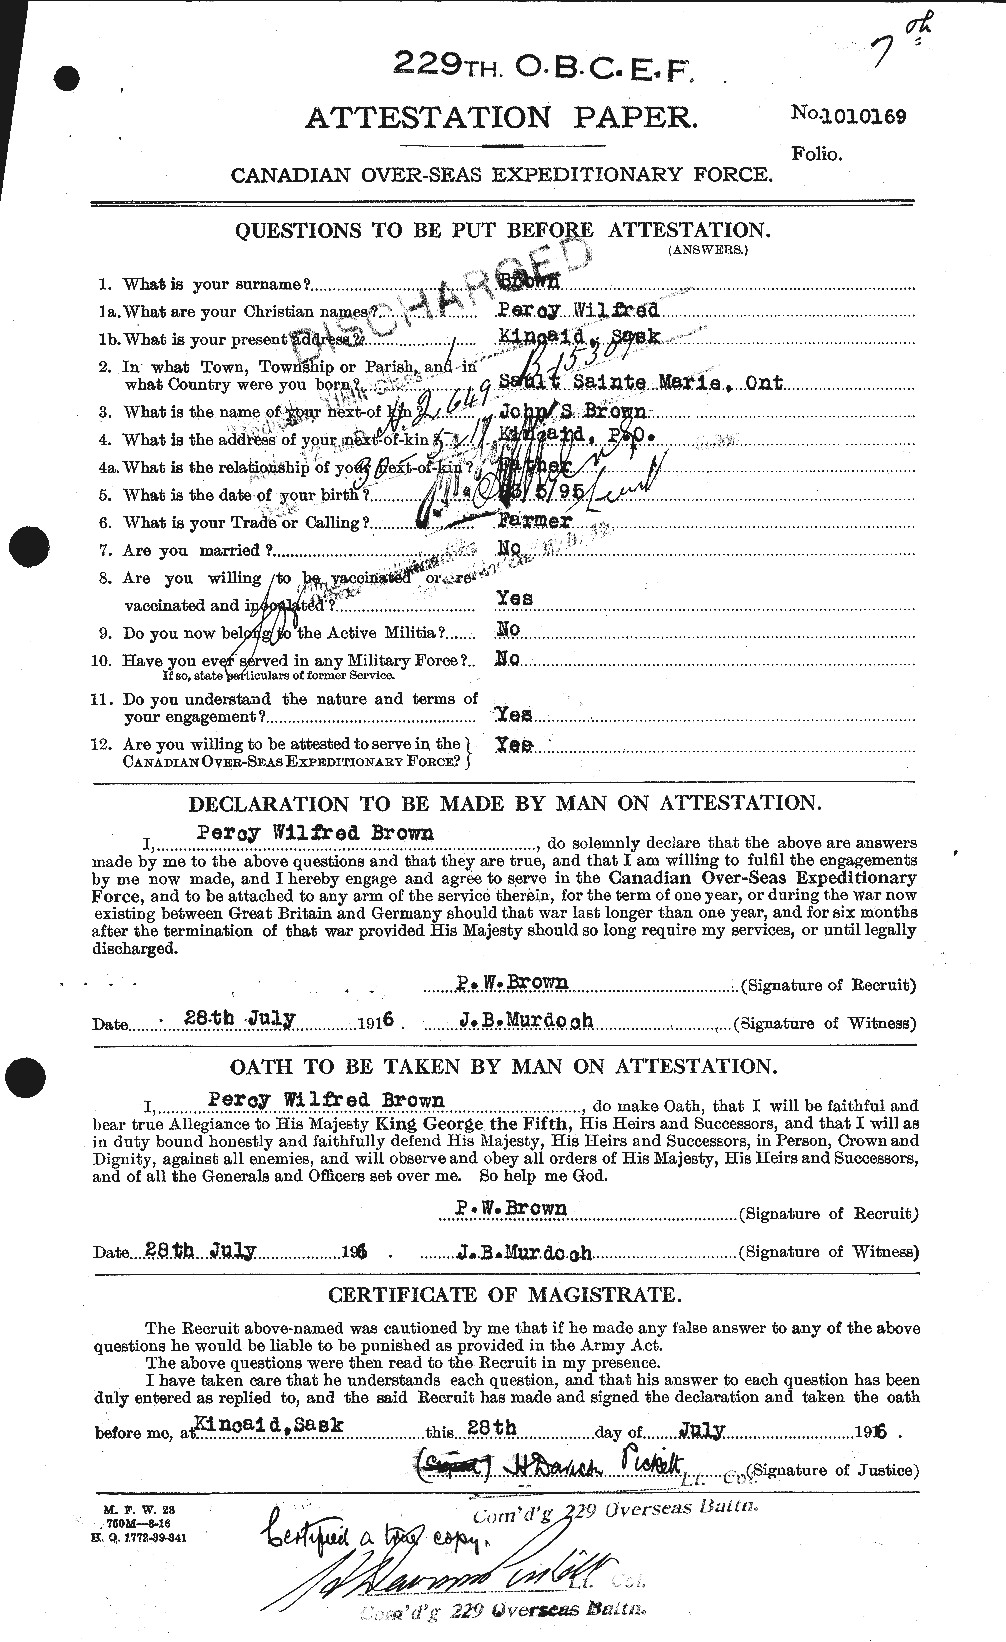 Personnel Records of the First World War - CEF 267182a